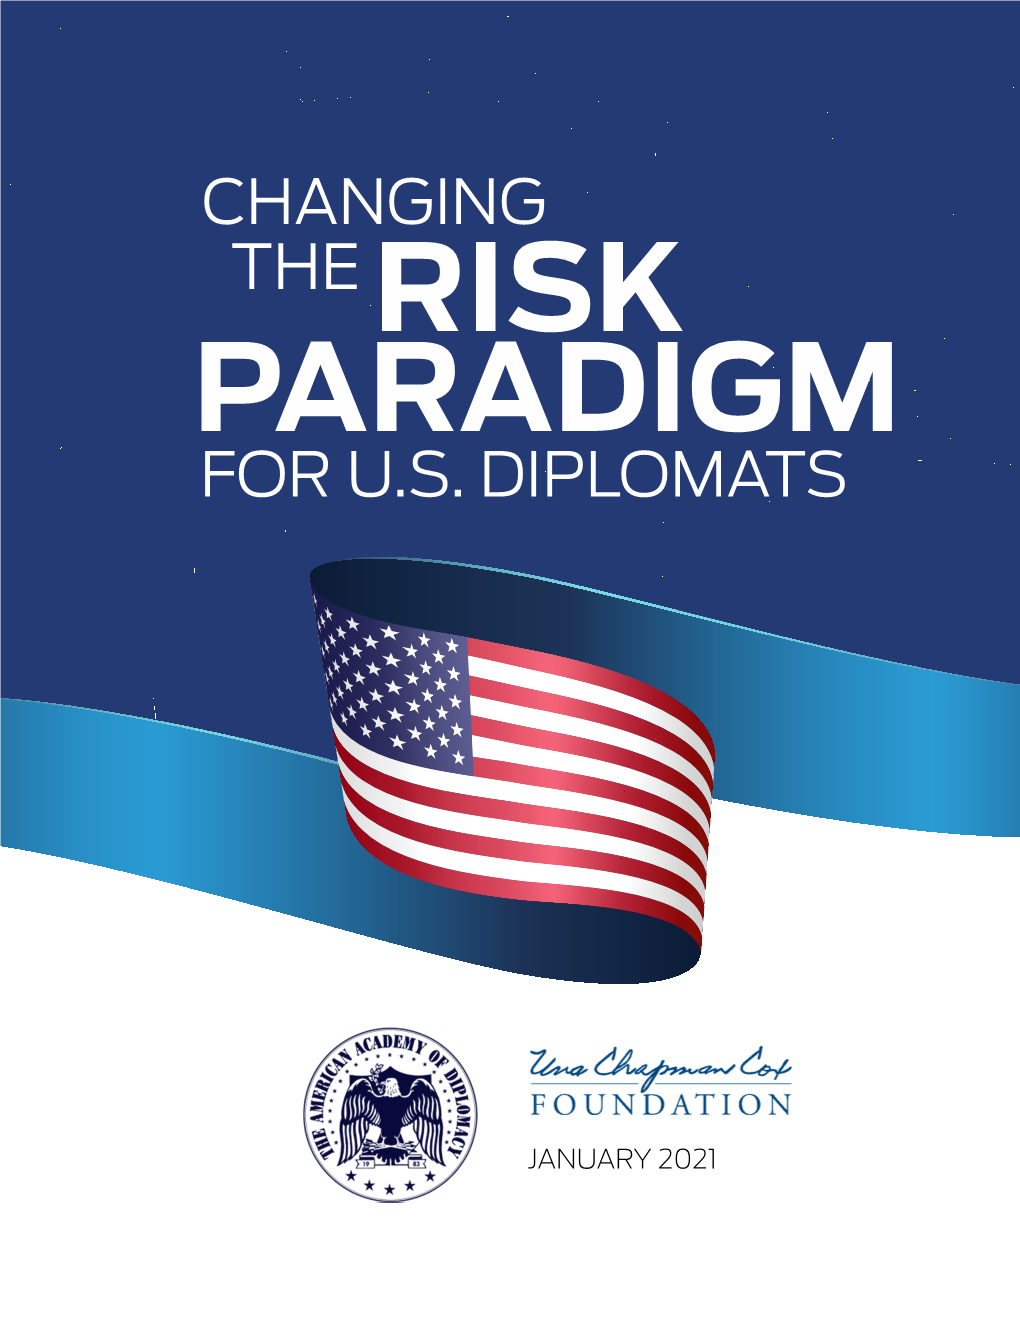 Changing the Risk Paradigm for U.S. Diplomats